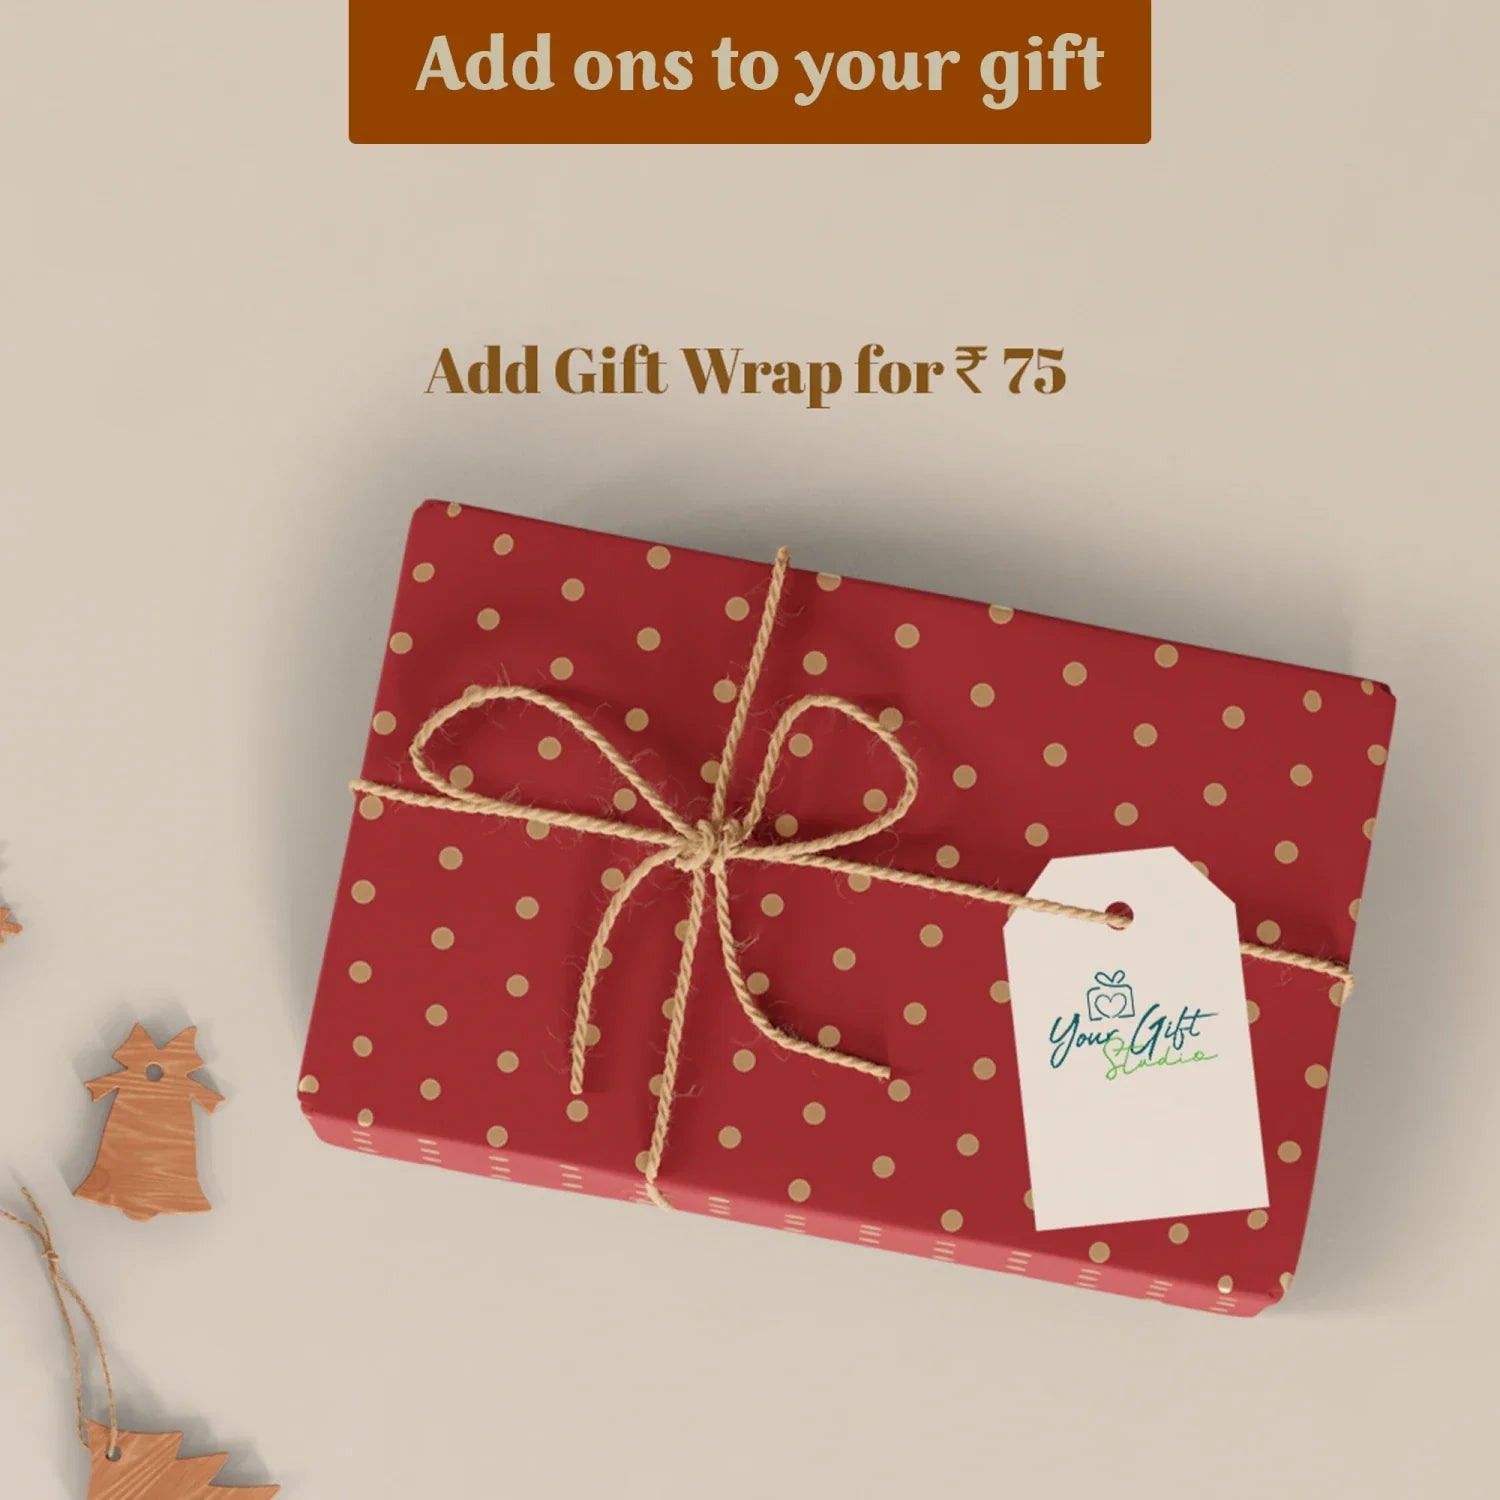 "Make your personalized gifts more awaiting and exciting to be opened with this elegant gift wrap to give it a flawless finish.  "